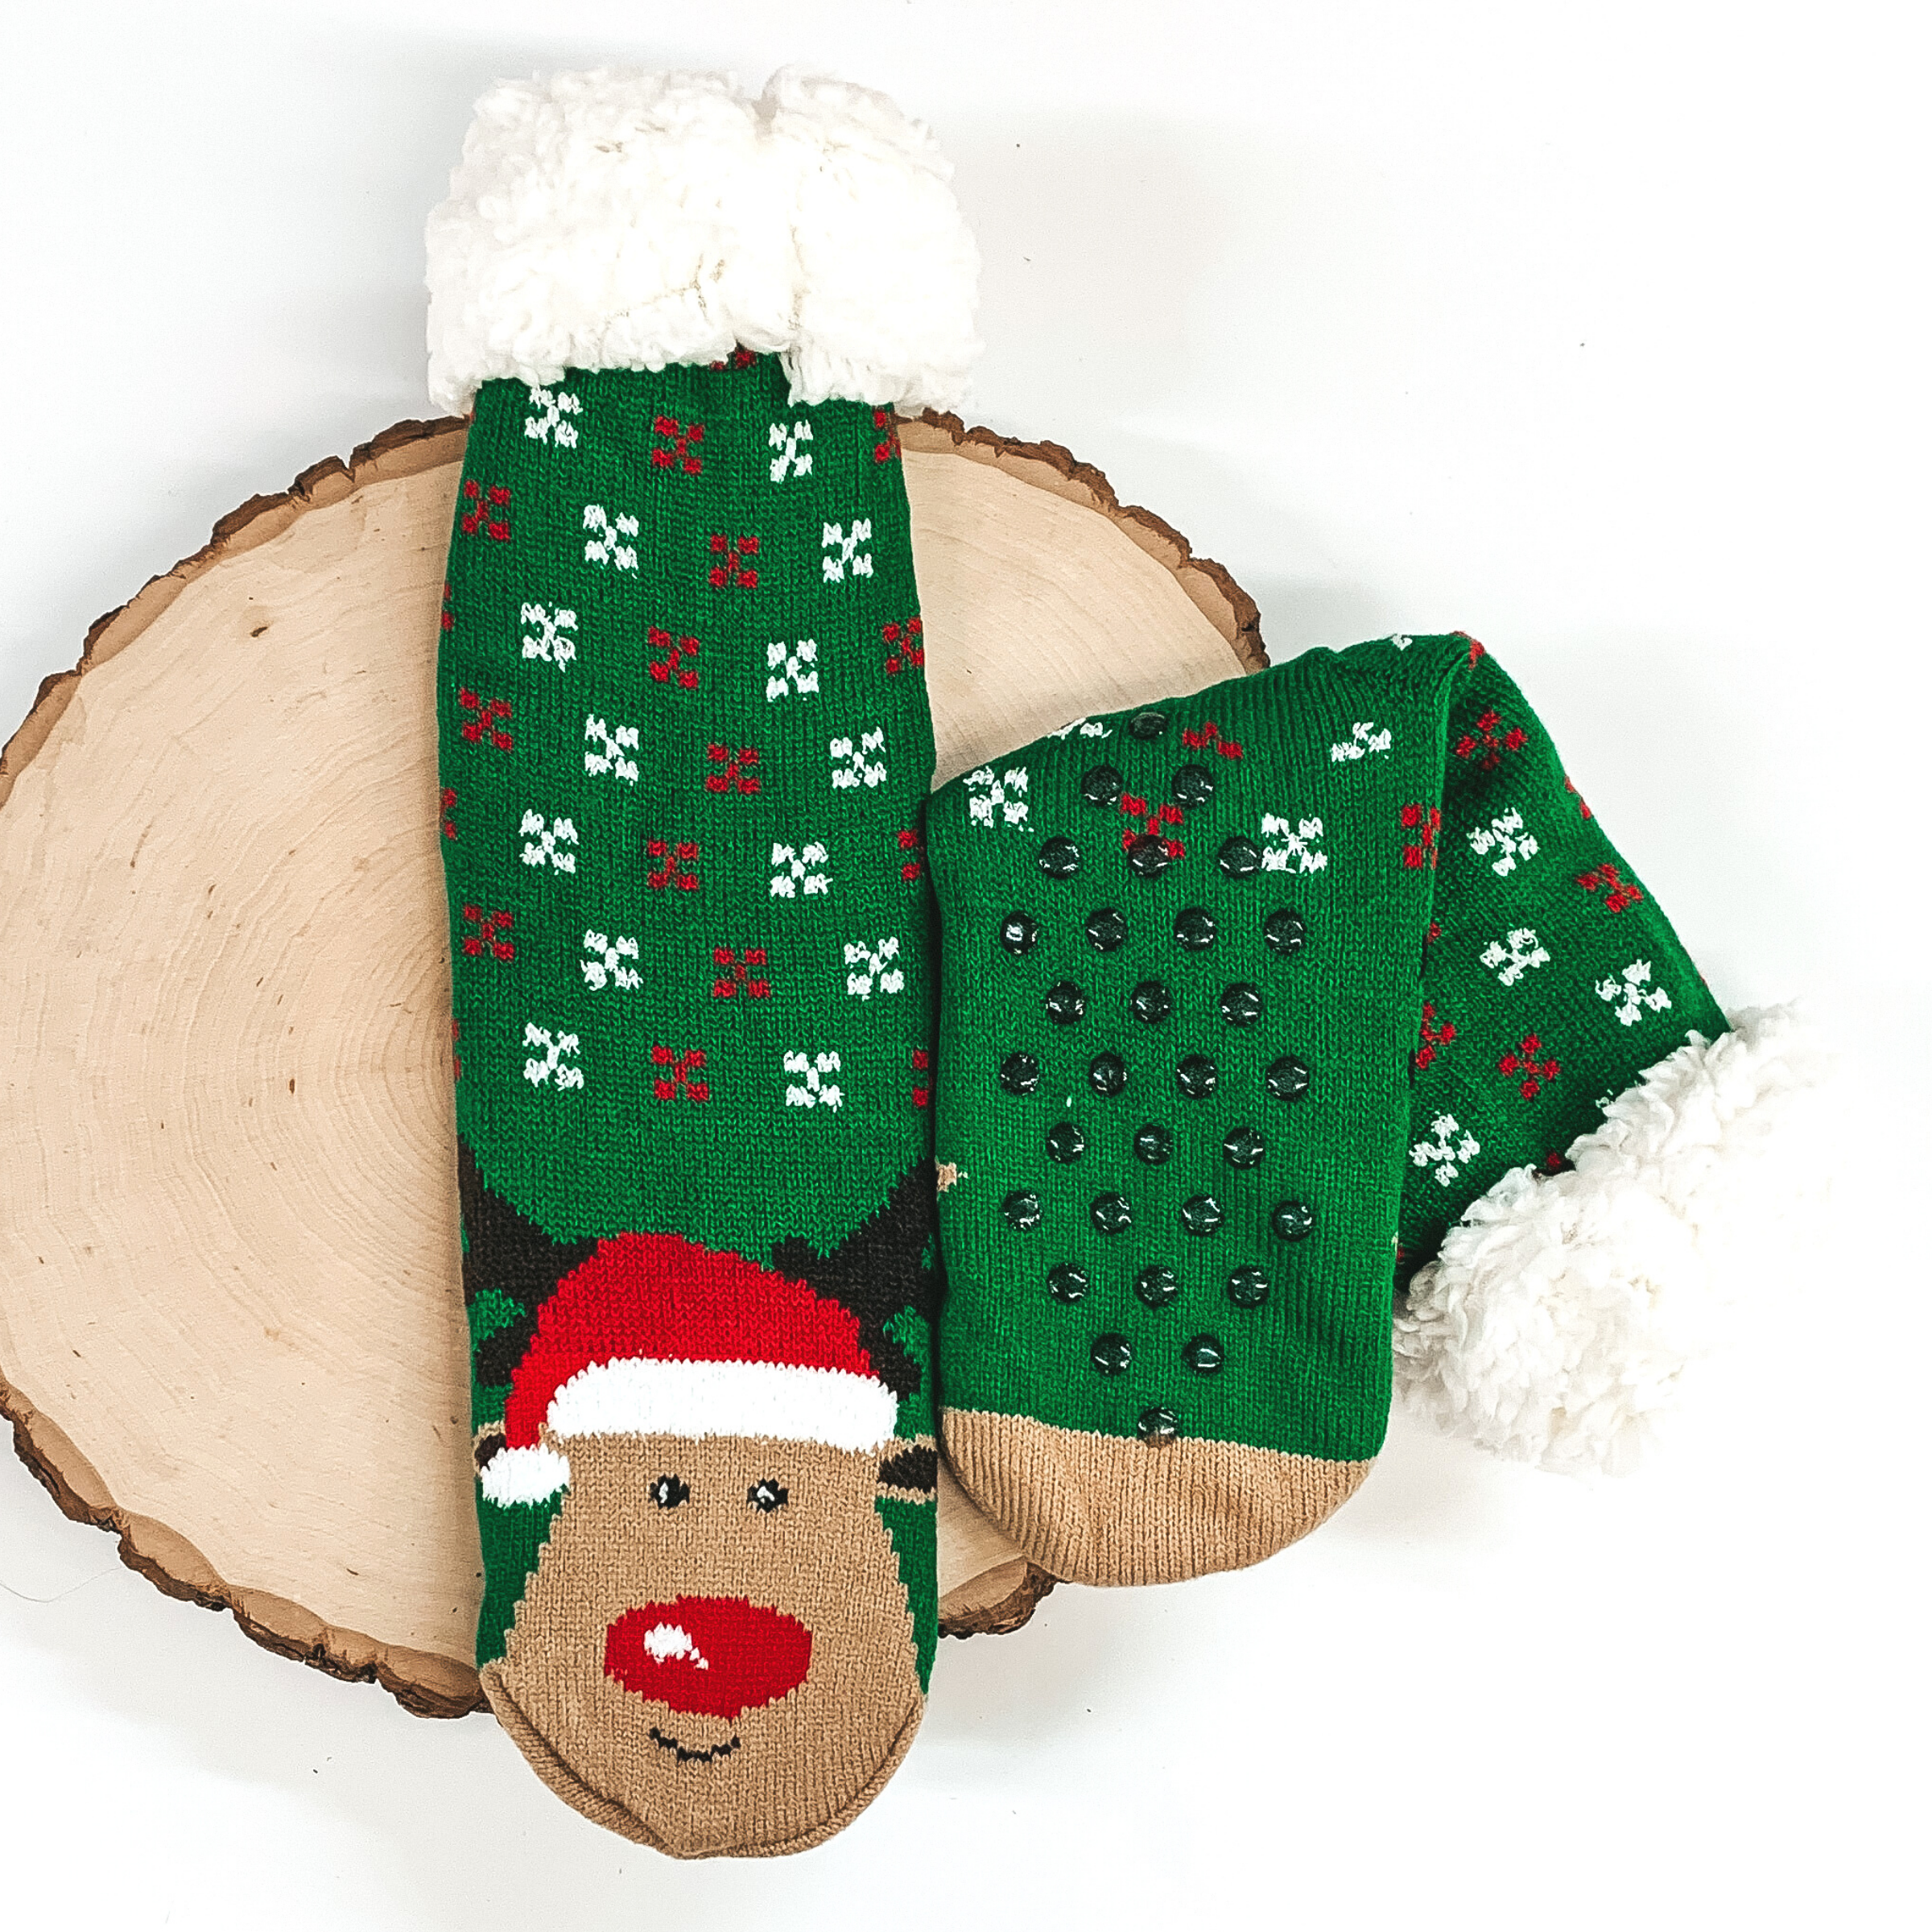 Green socks that has Rudolph's face with a santa hat towards the bottom of the socks. These socks also have red and white snow flakes on the ankle parts, has rubber grips on the bottom, and white fluff on the top of the socks. these socks are pictured laying on a piece of wood on a white background.